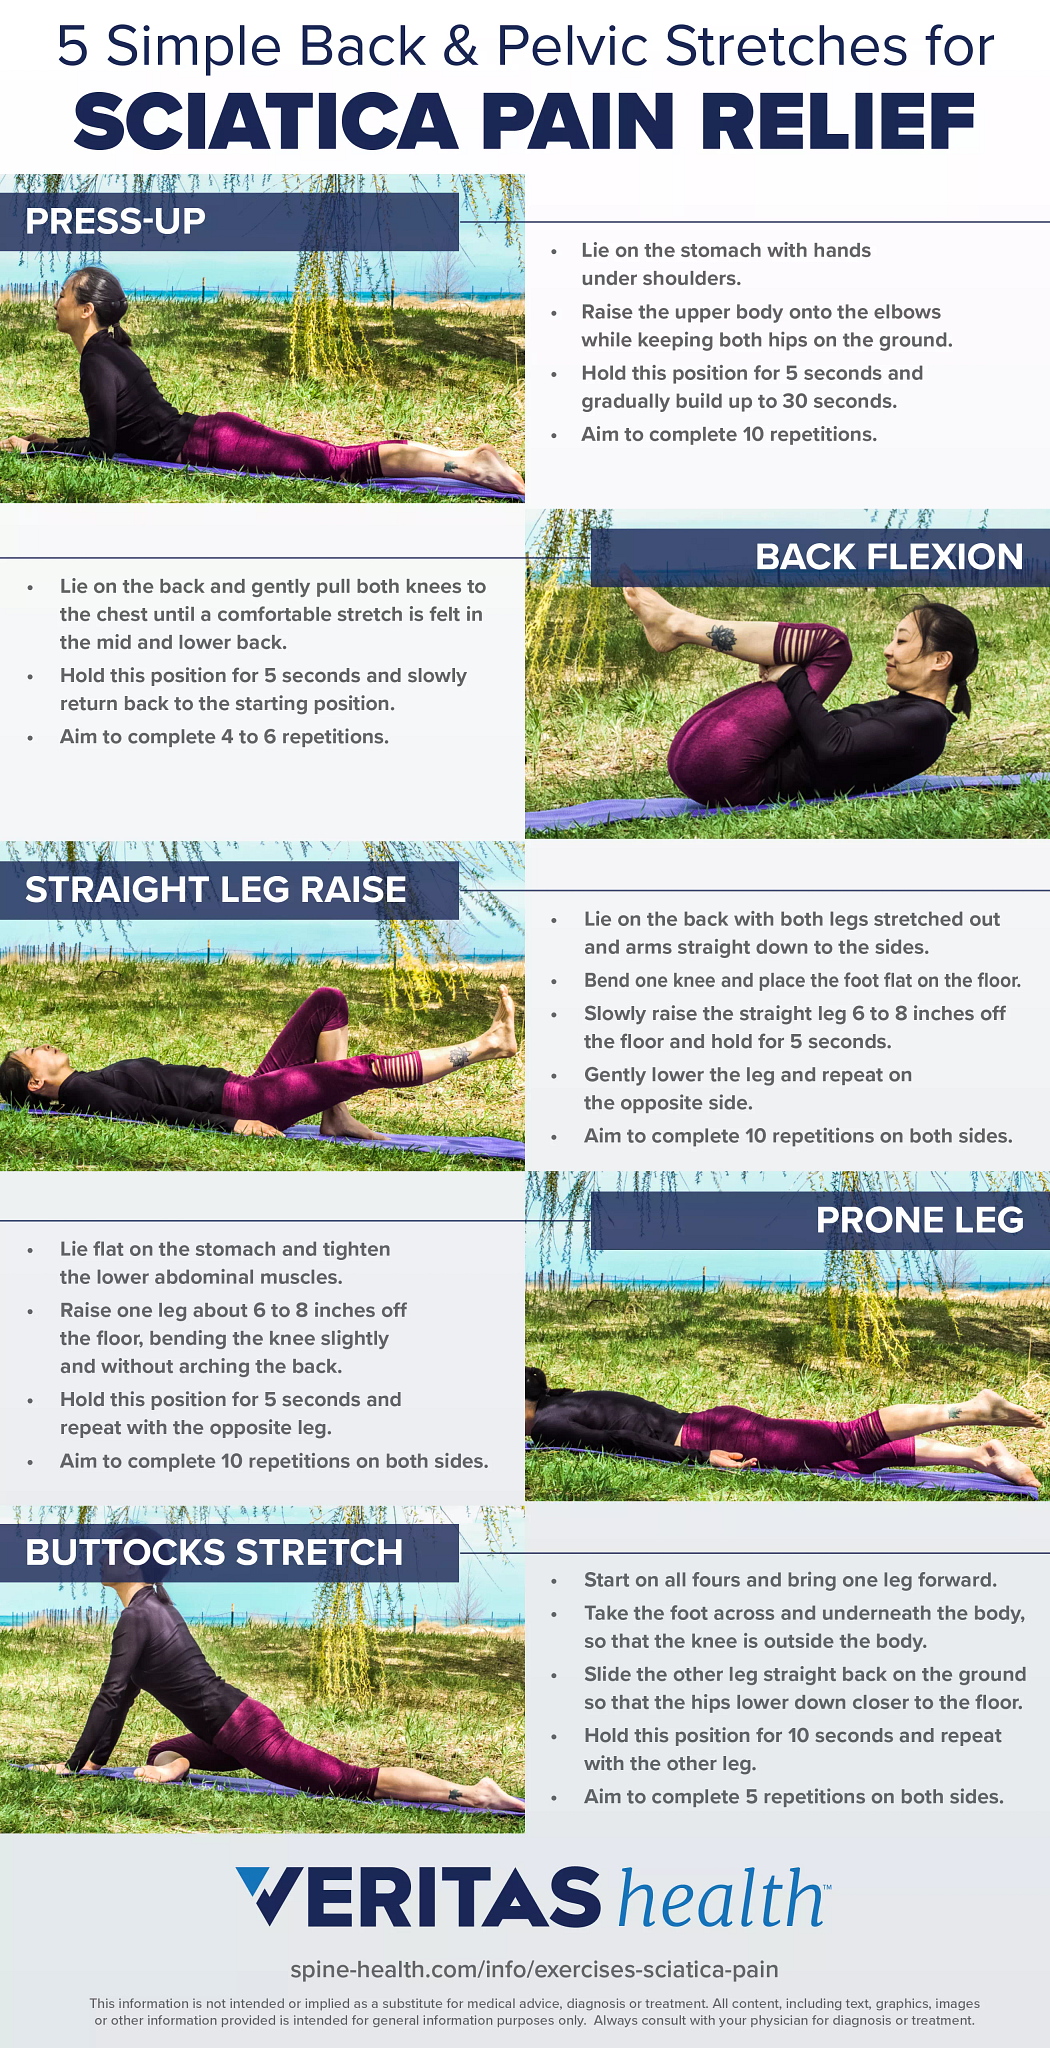 Yoga For Sciatica - 6 Effective Poses To Ease Sciatica Pain | Yoga for  sciatica, Sciatica, Sciatica exercises